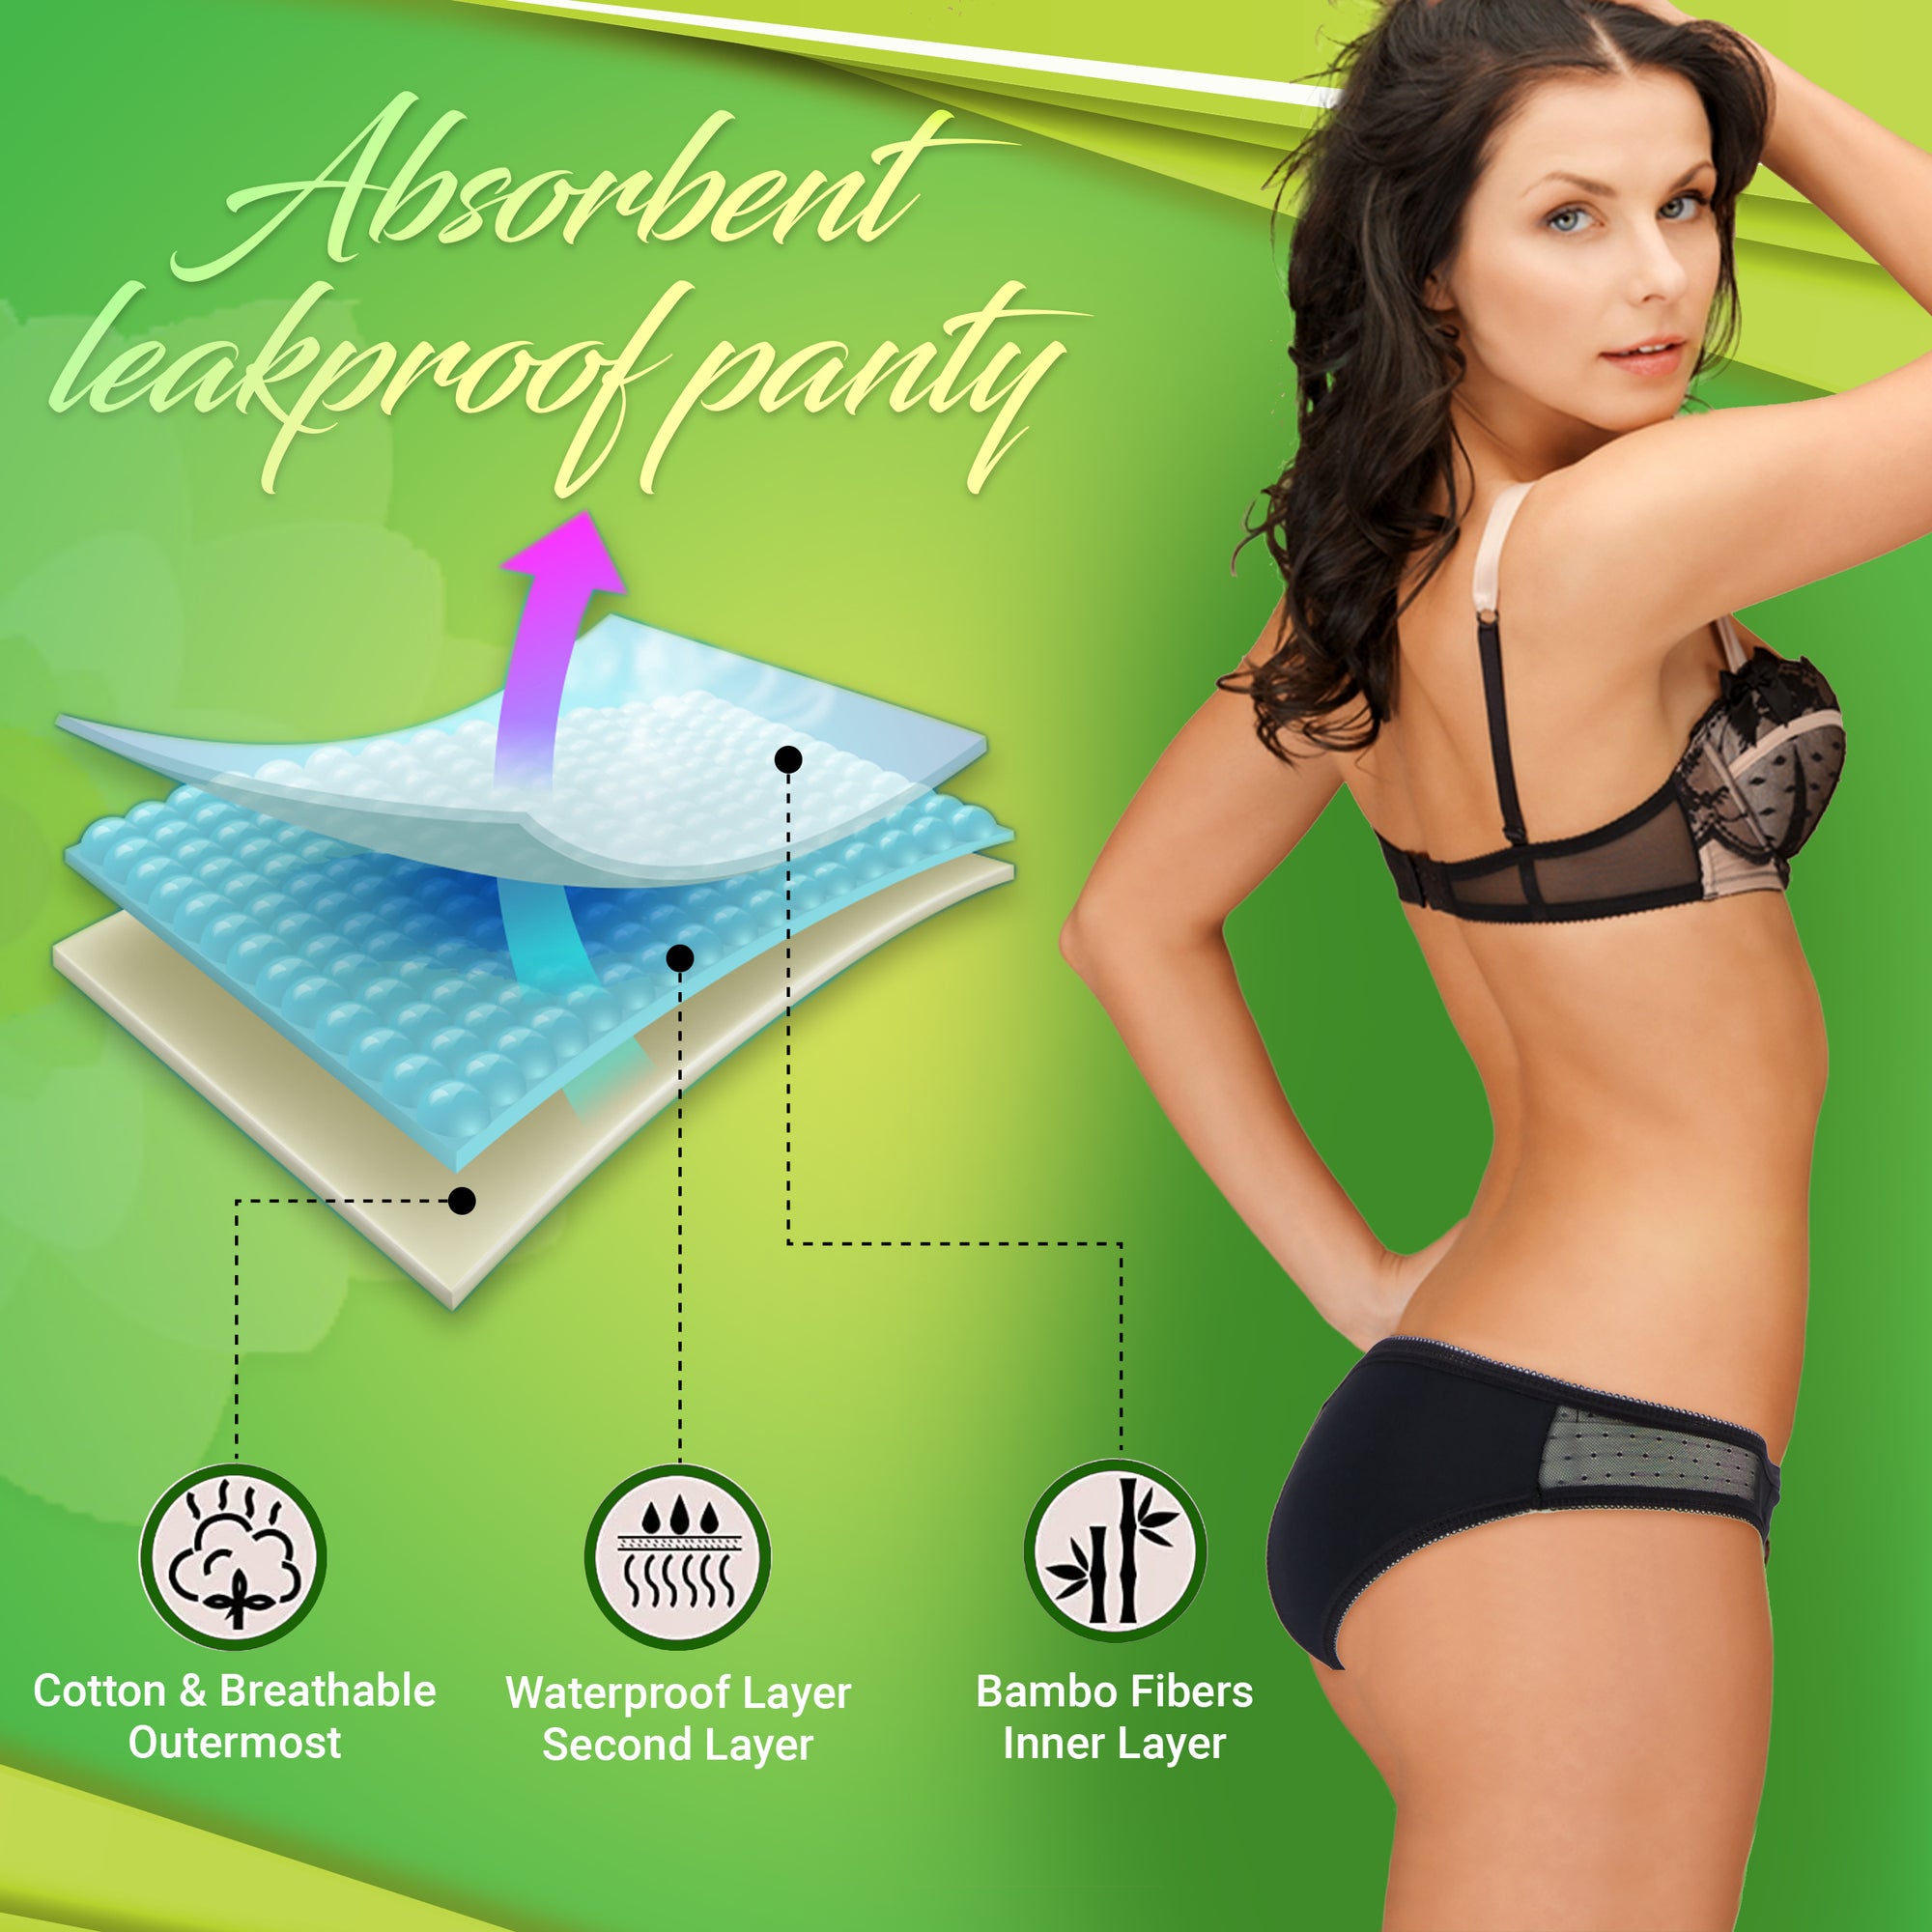 Eco friendly,Reusable-NO Pads,Tampons-Period Women Underwear-Period Panties, Anti-Odor,Absorbent-Anti-Leak Menstrual Underwear by Free Lily (Seamless  (Normal Period Days), L (42-44)) price in UAE,  UAE